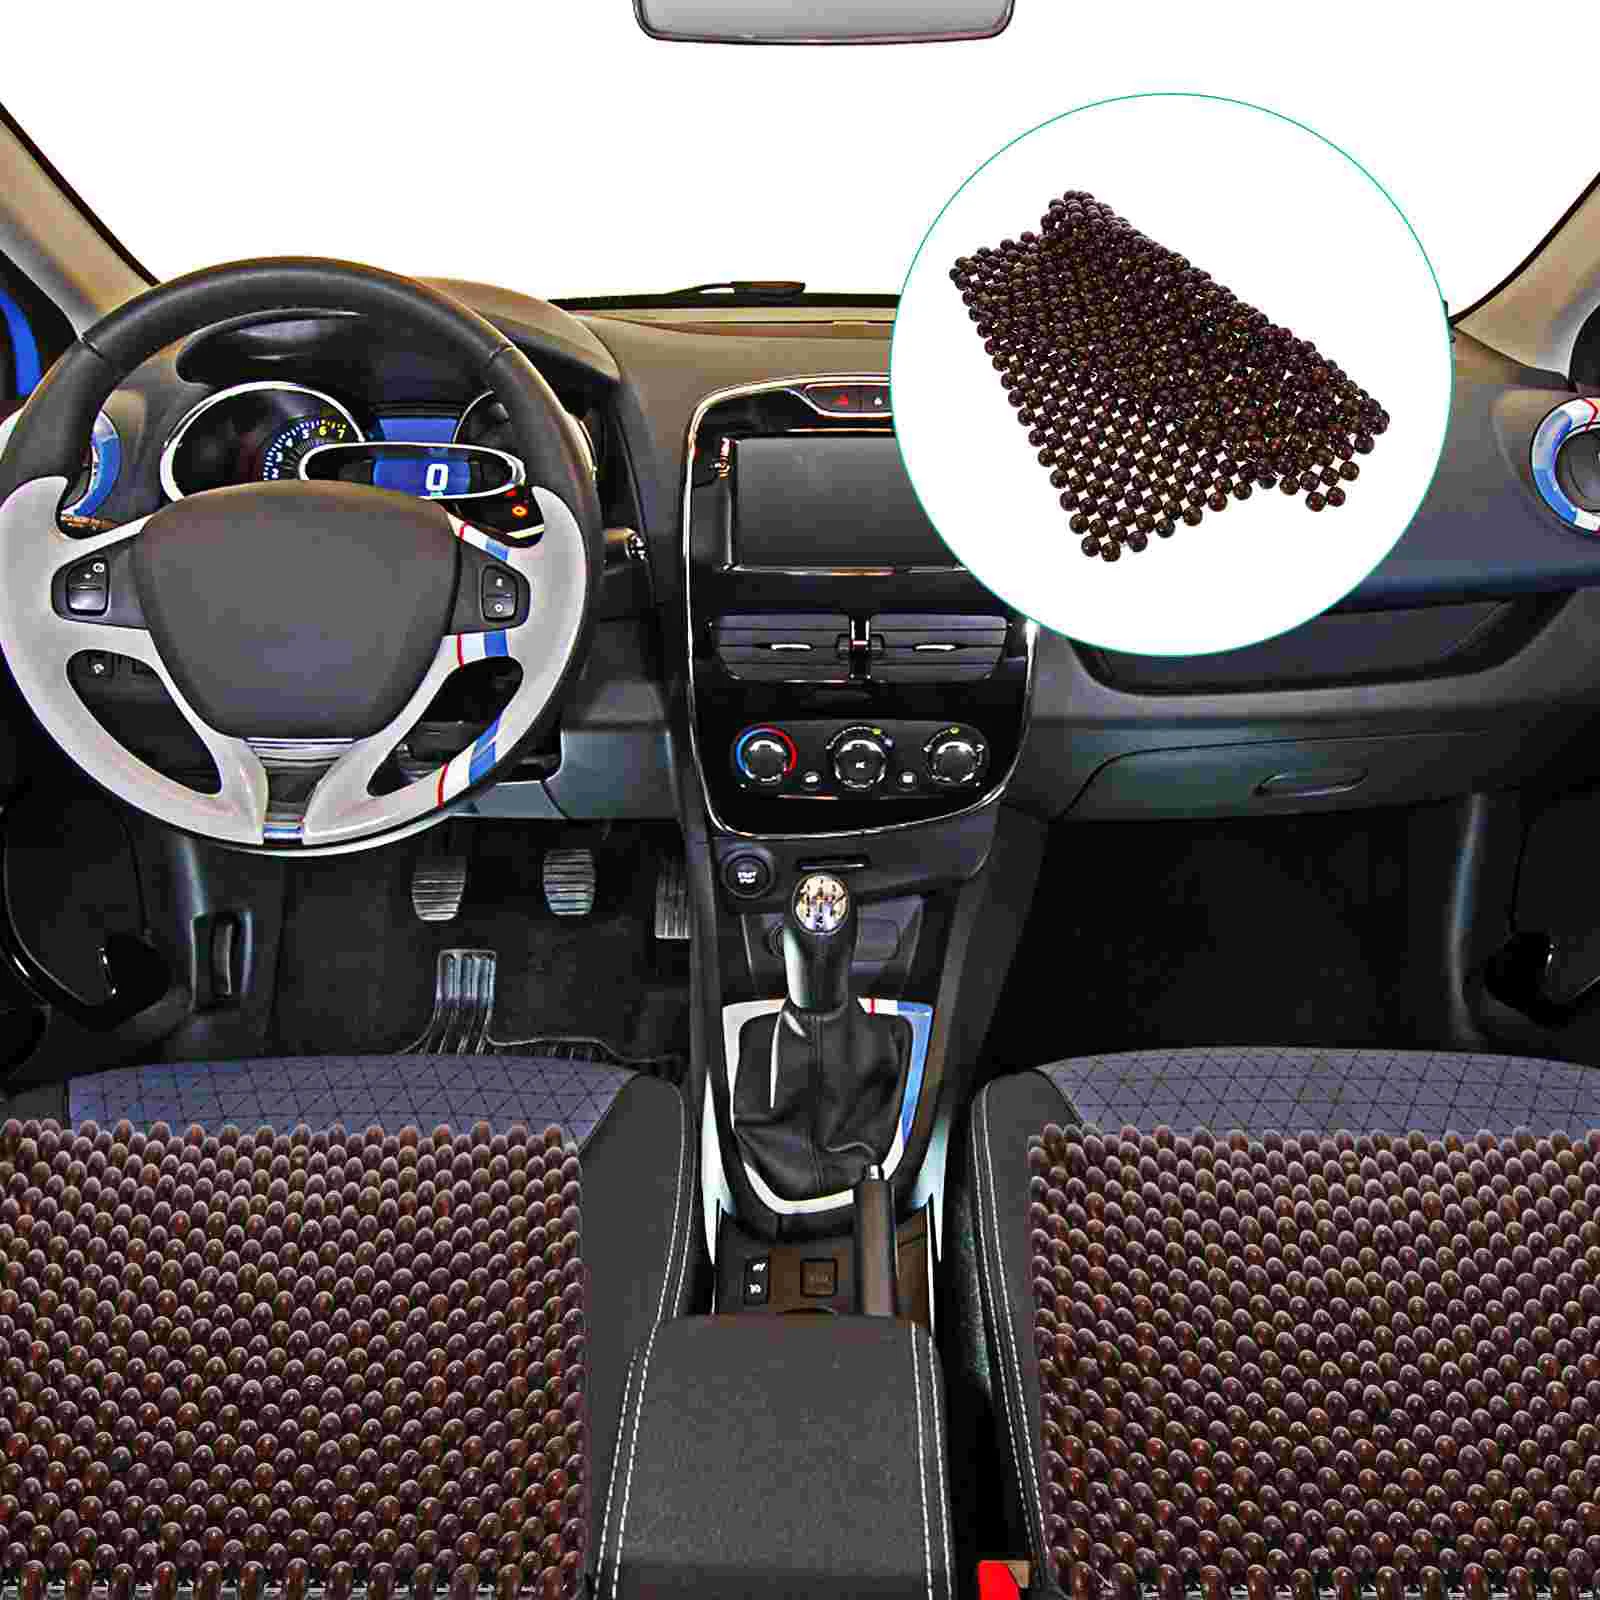 

Wooden Bead Cushion Beads Seat Pads Summer Cool Comfortable Cushions Auto Beaded Car Mat